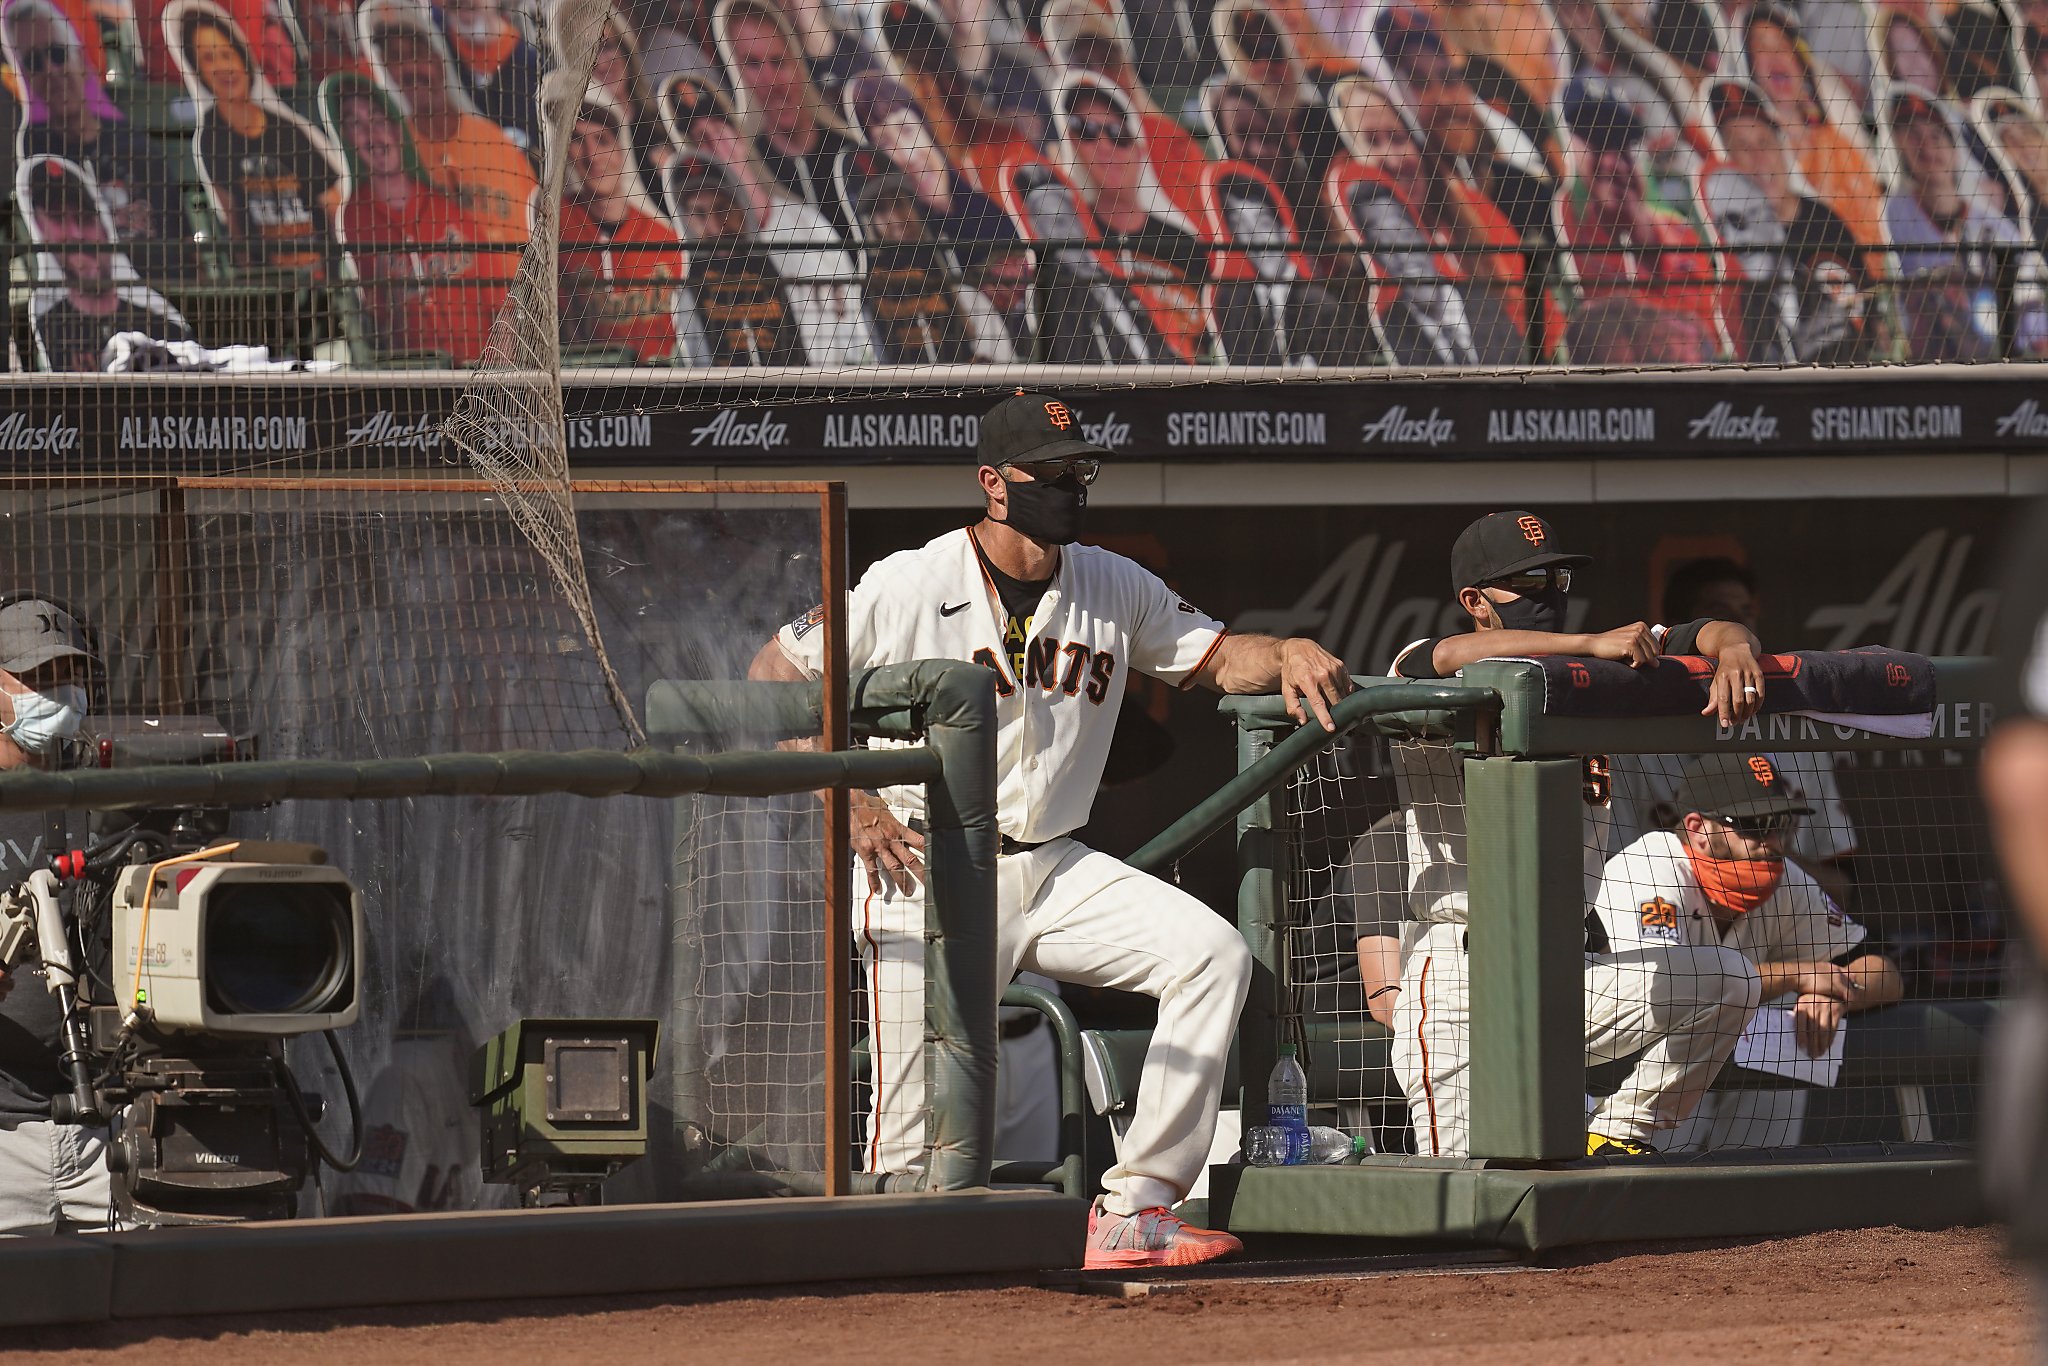 Five predictions for the 2022 San Francisco Giants - McCovey